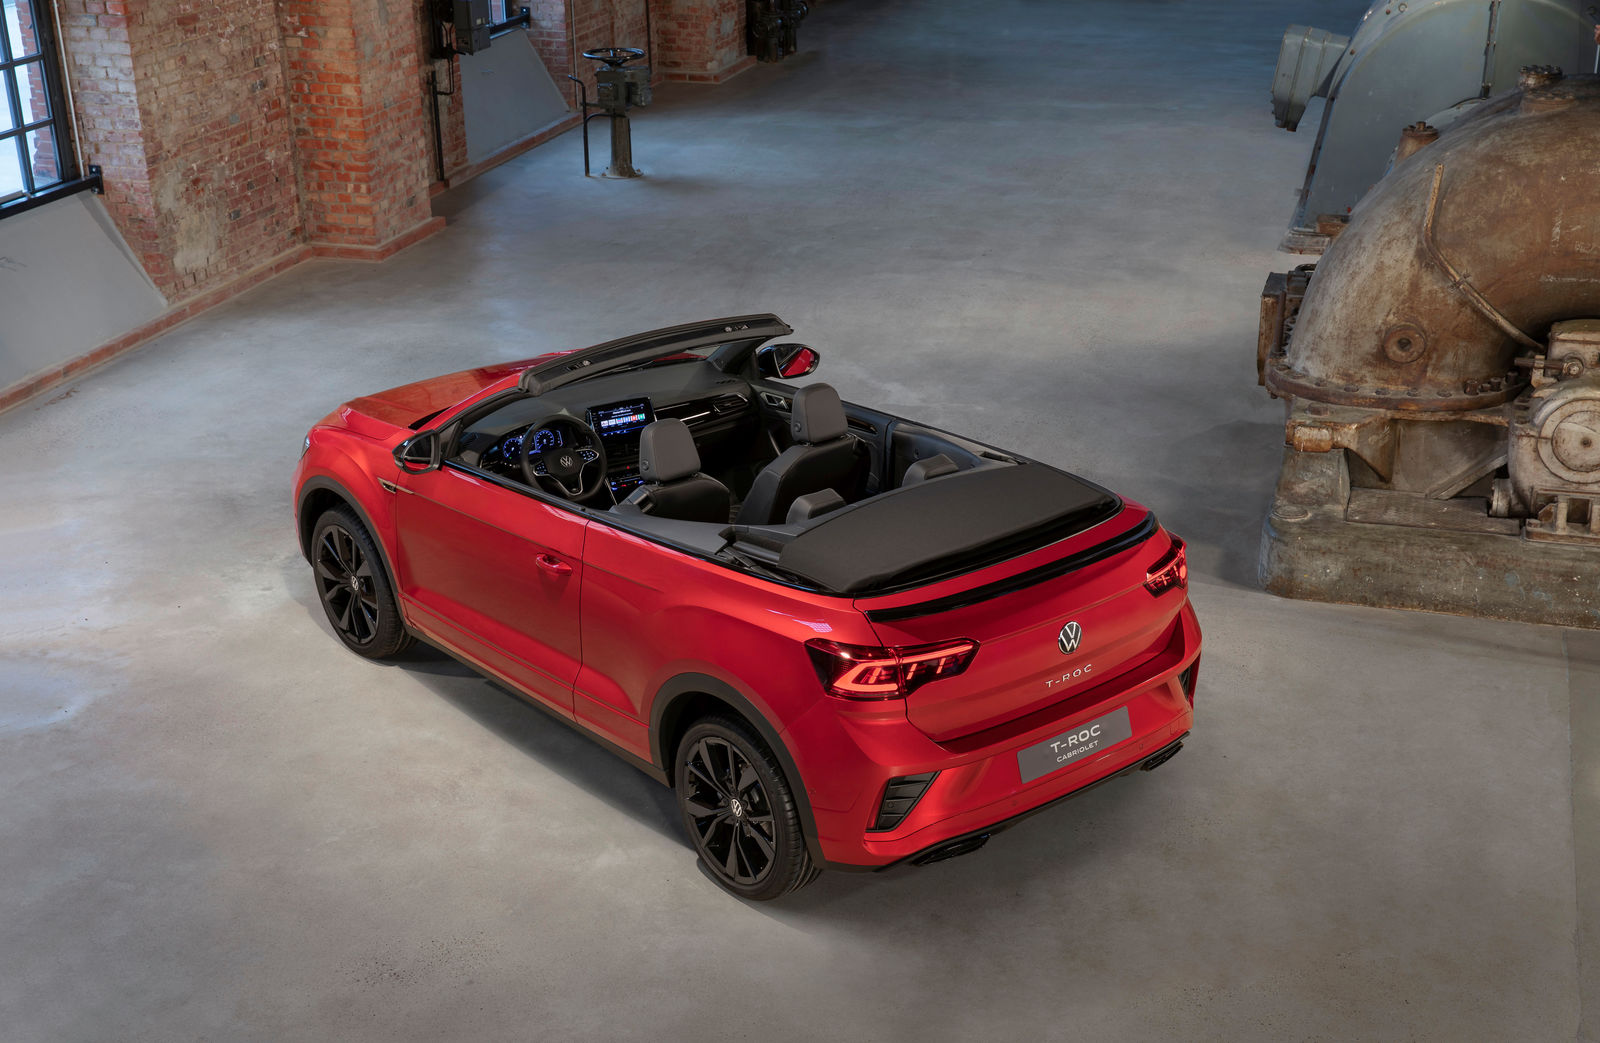 Enormous freedom: The new T-Roc Cabriolet